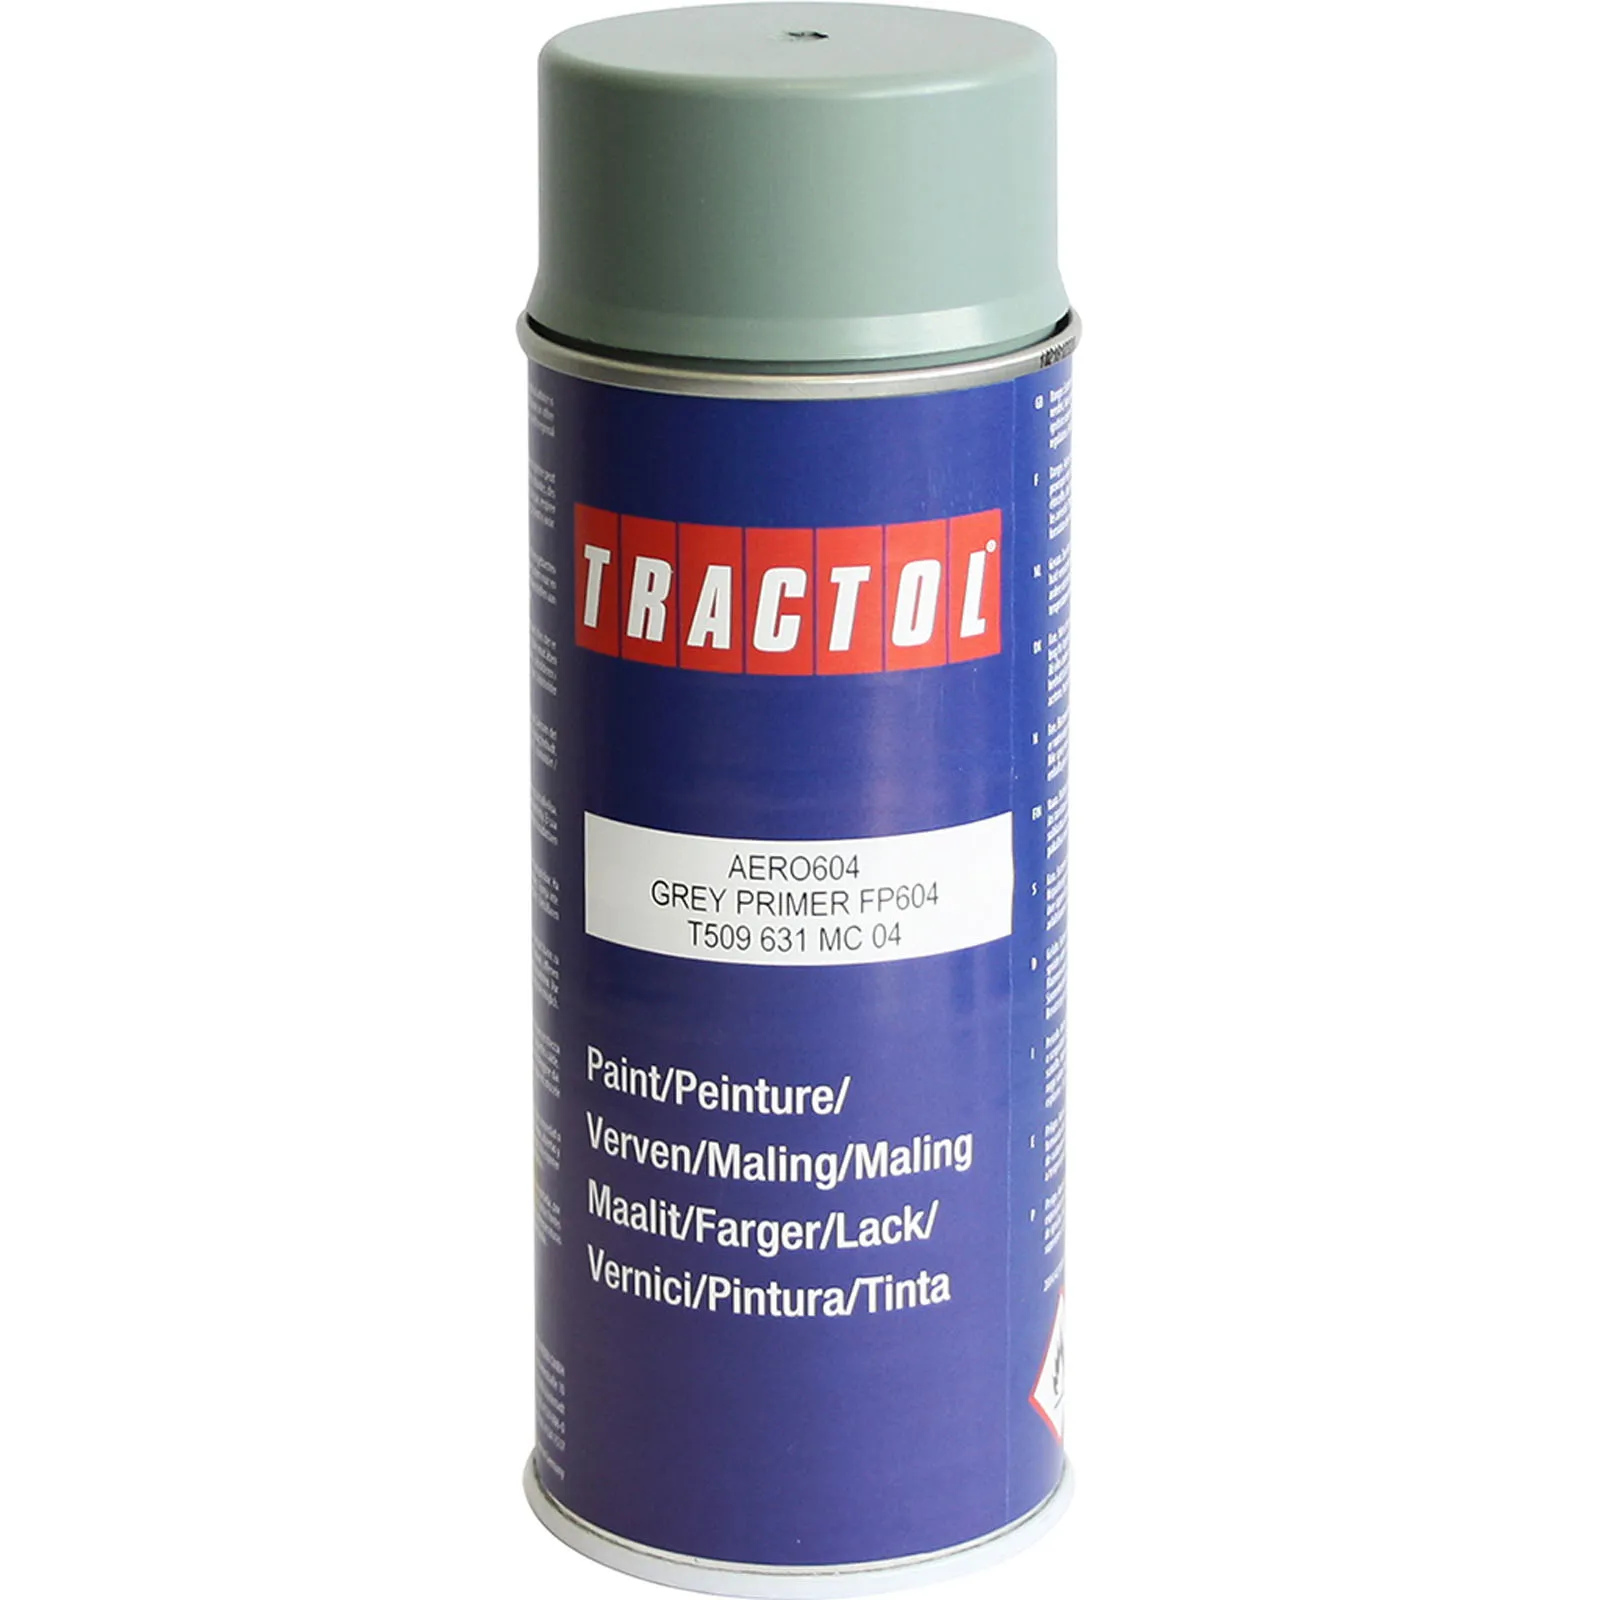 Tractol Paint 400ml Spray Can Grey Primer